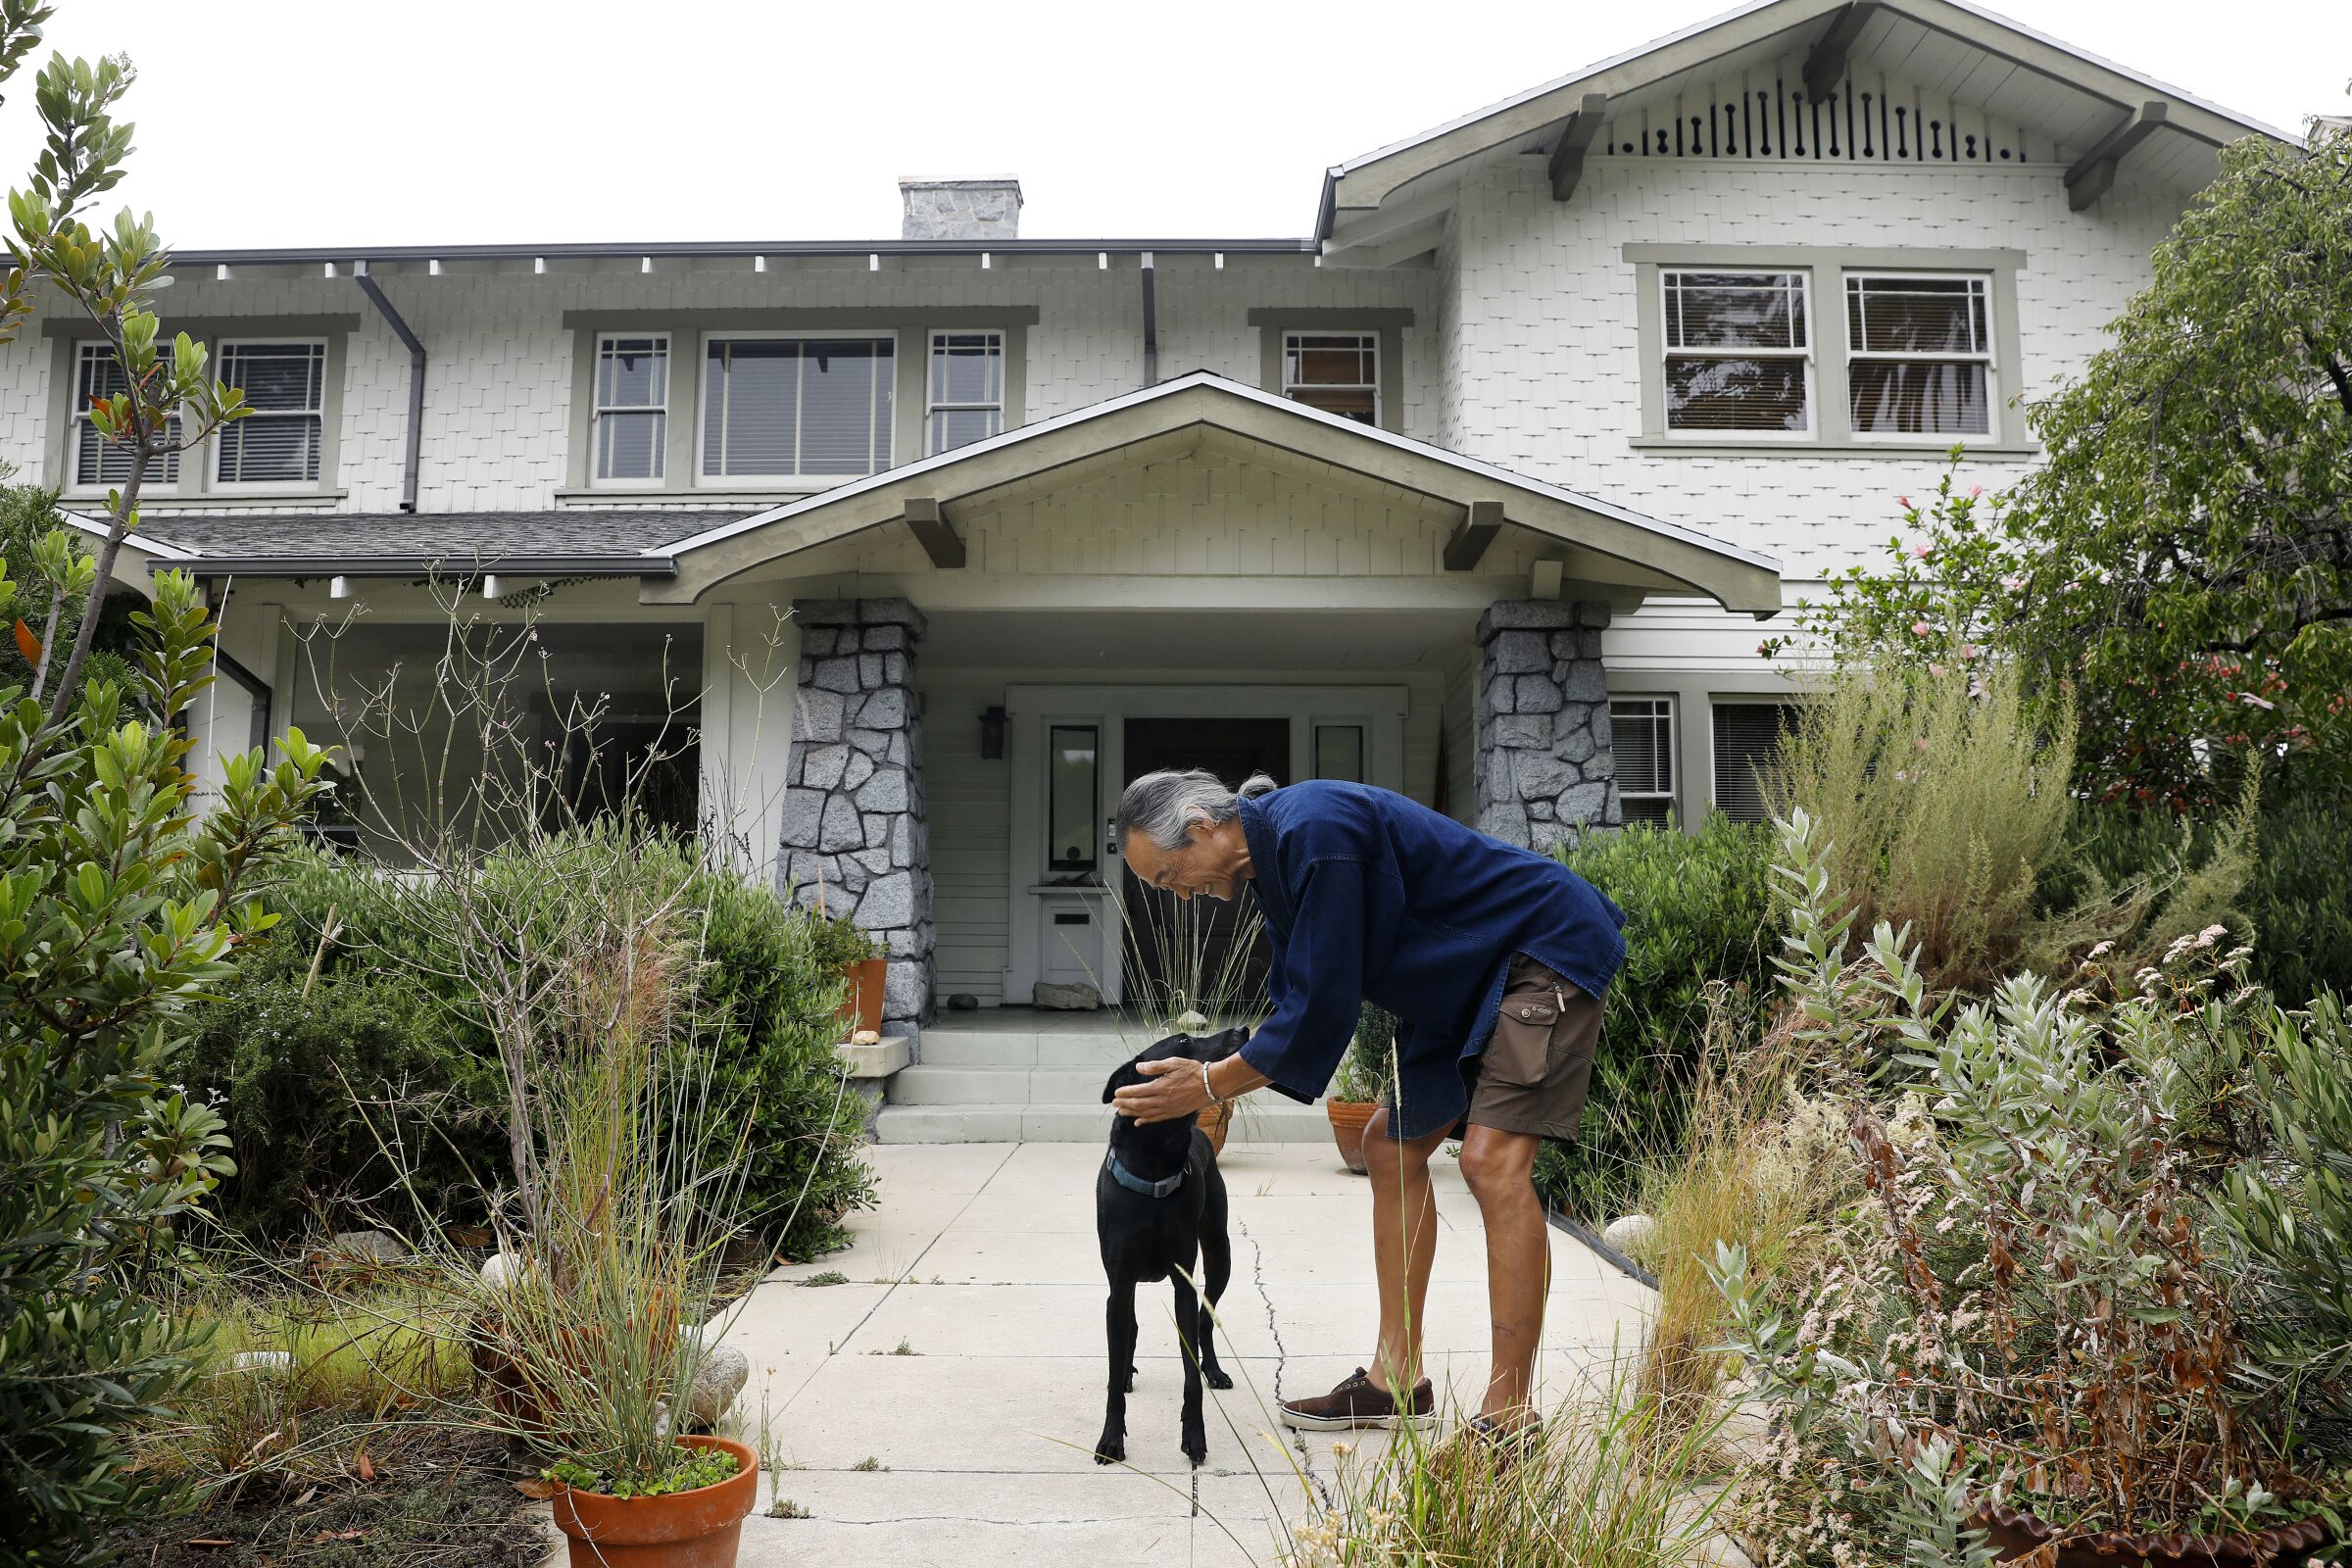 A man bends over to pet a medium-sized black dog in front of a house with wild-looking plants in the yard.